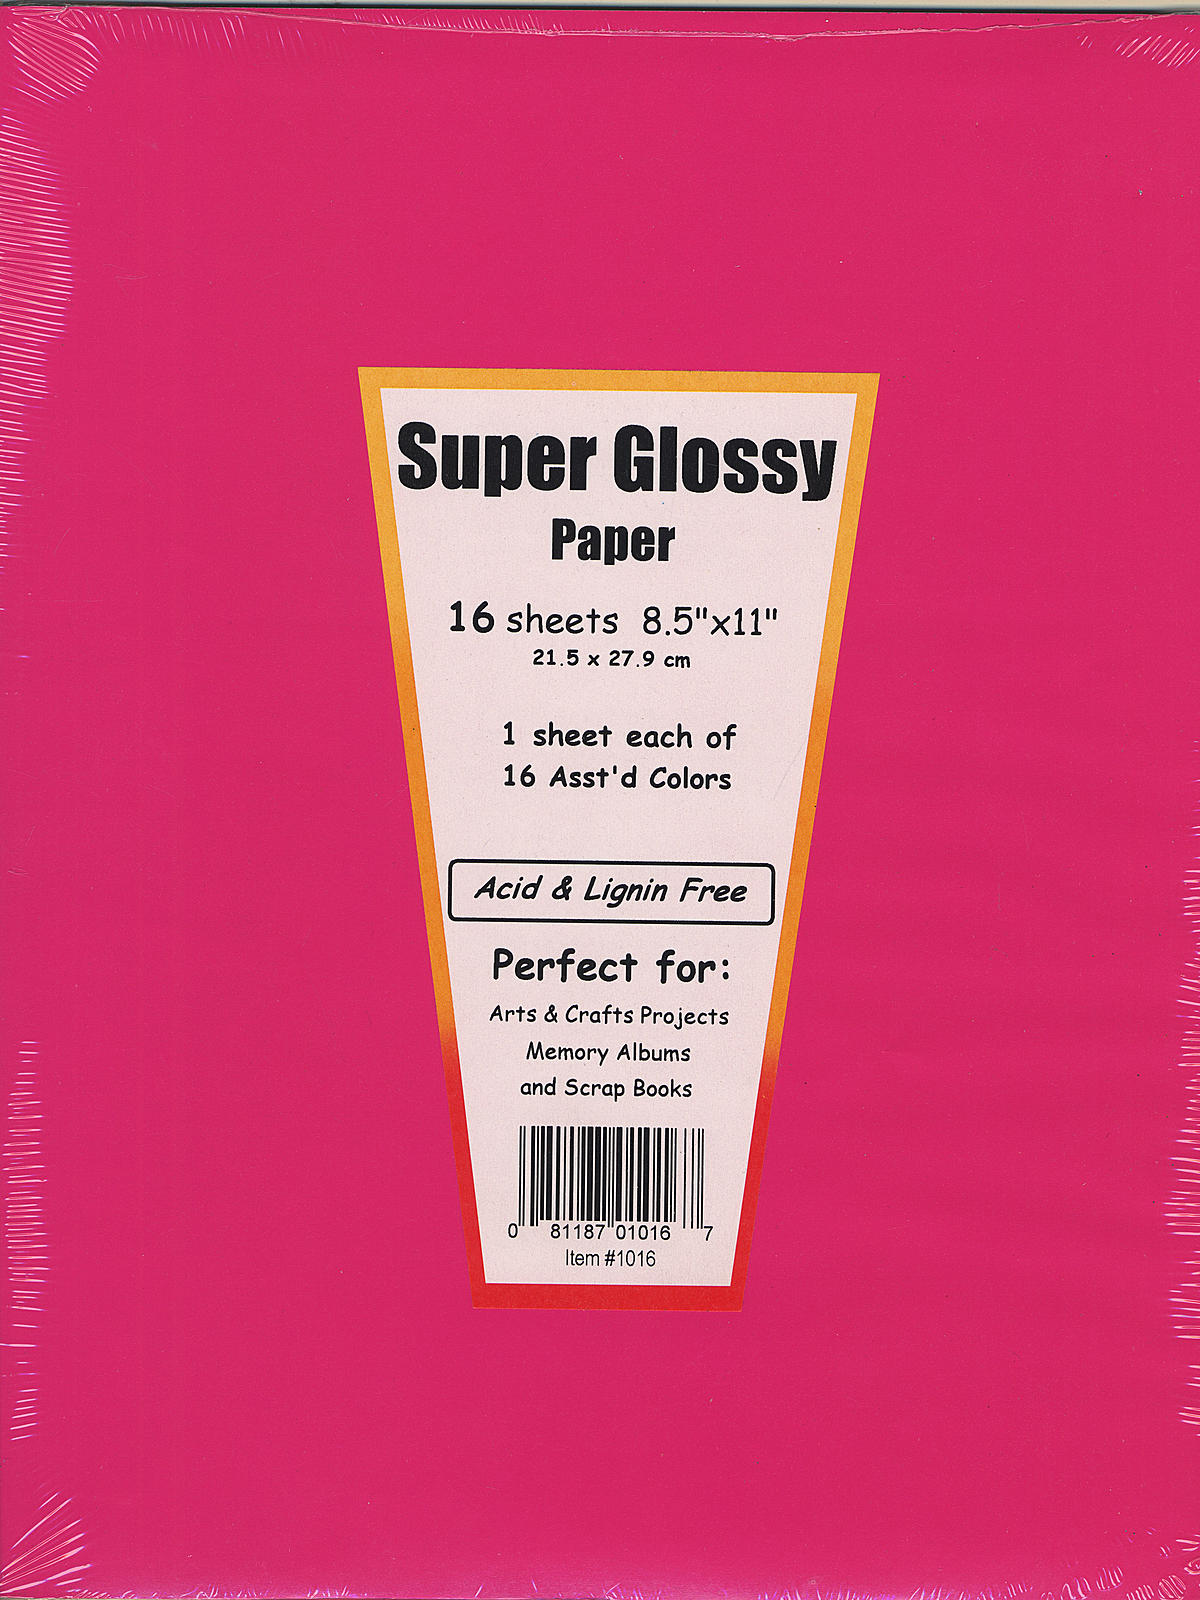 Super Glossy Paper - 8.5inx111 each Of 16 Assorted colors